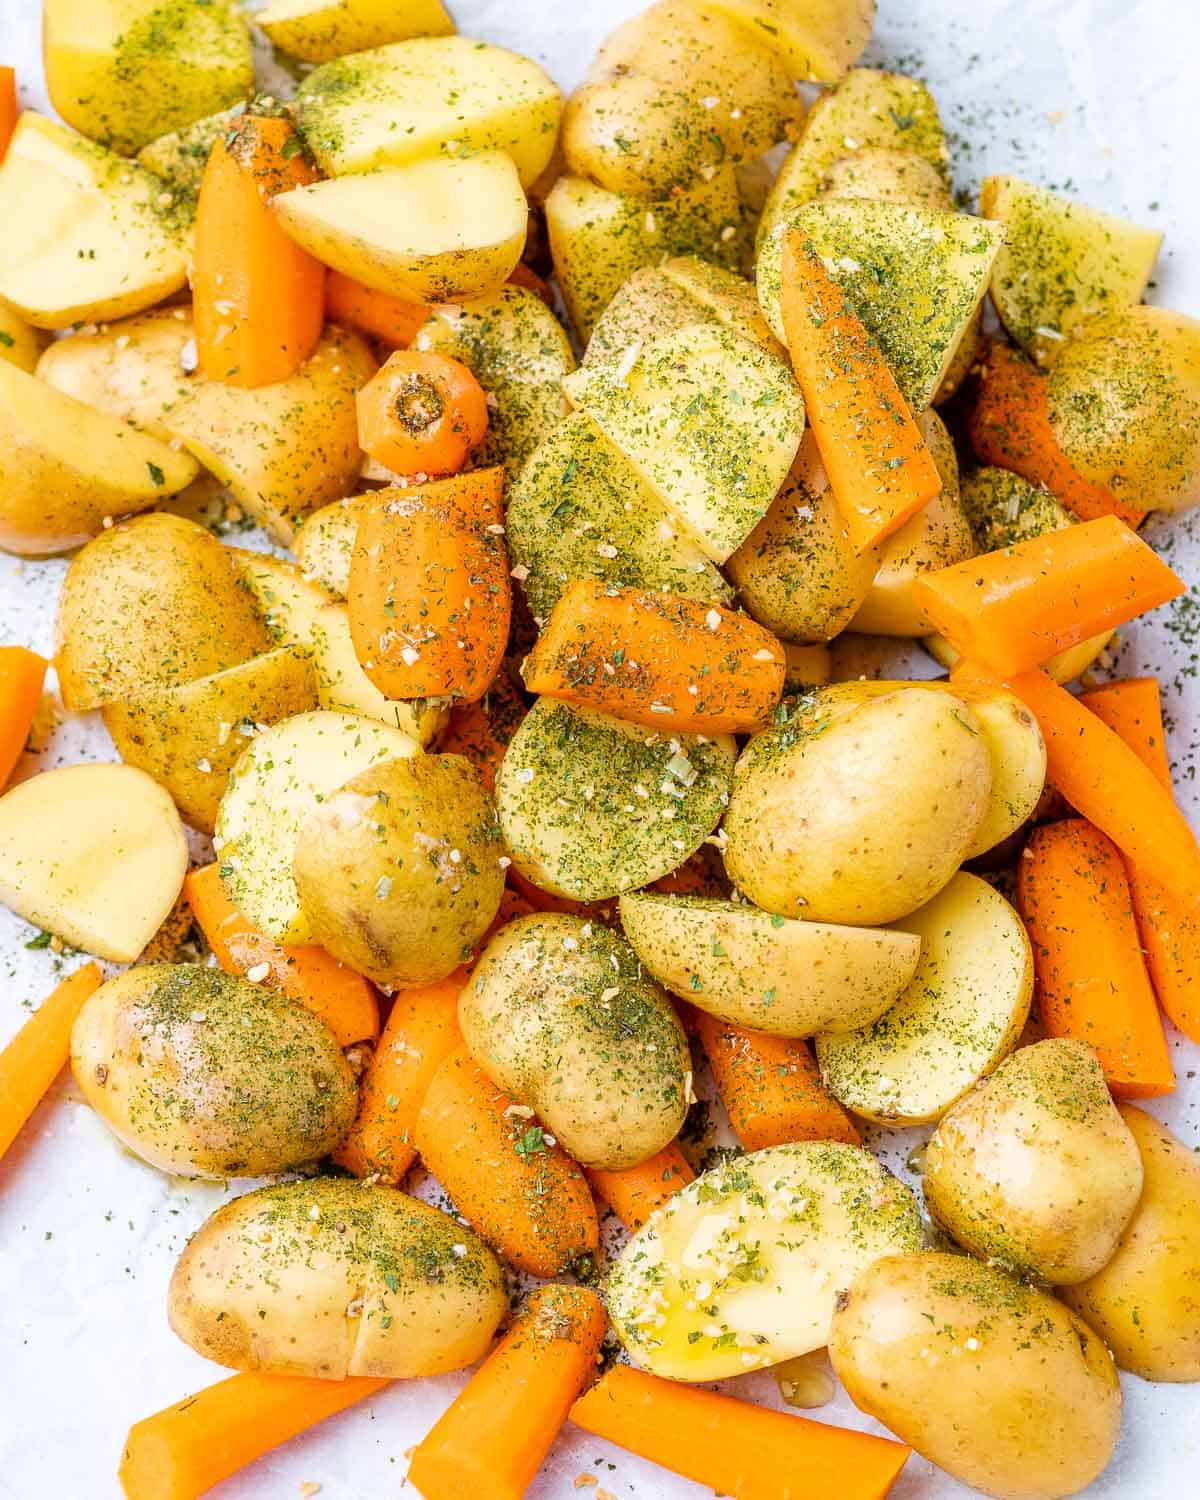 Tossing baby potatoes and carrots with seasoning.